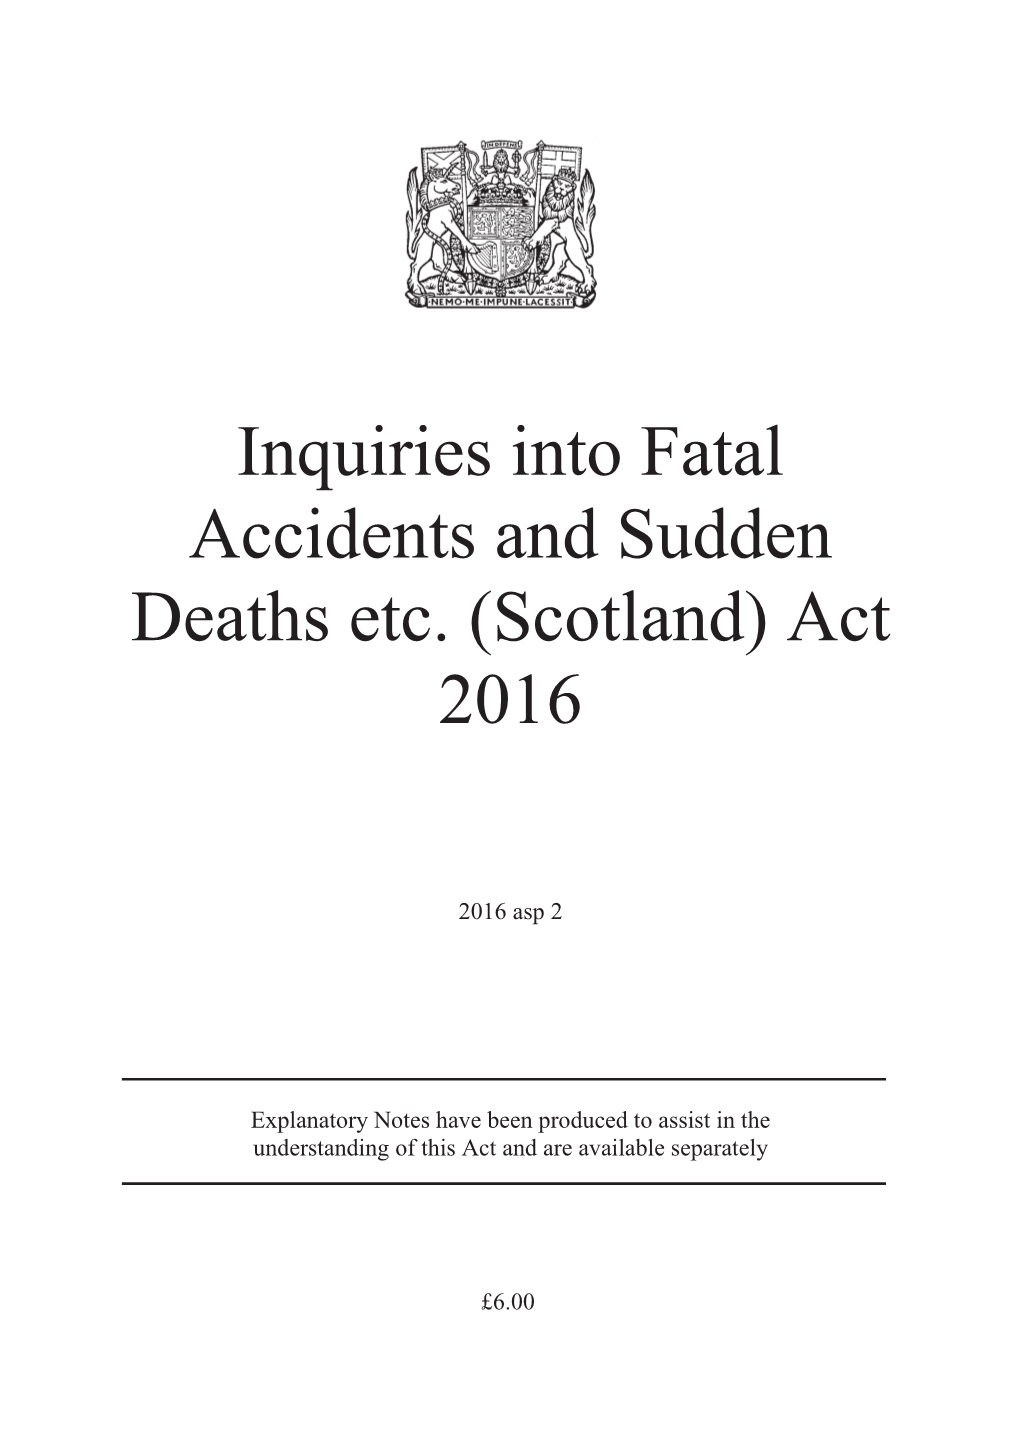 Inquiries Into Fatal Accidents and Sudden Deaths Etc. (Scotland) Act 2016